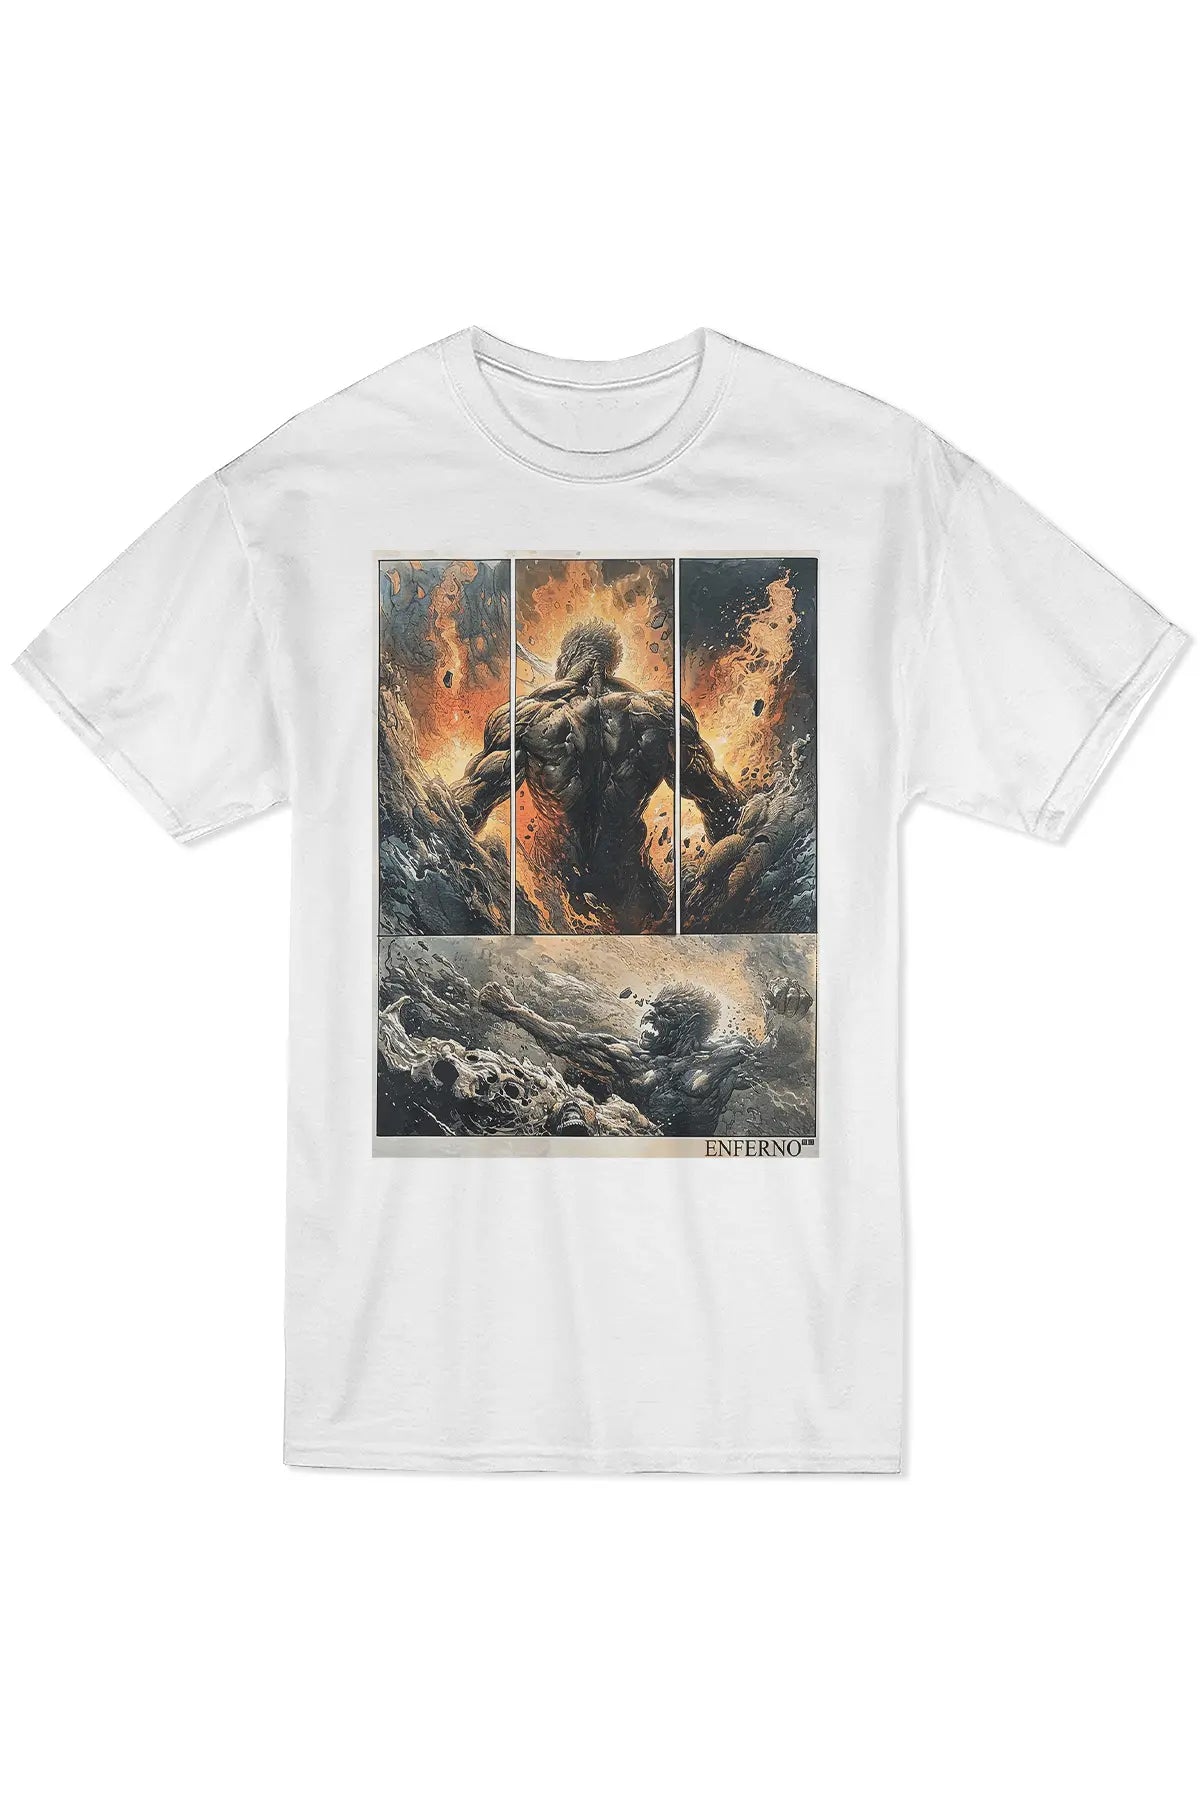 Enferno The Furnace Born Tee in White.